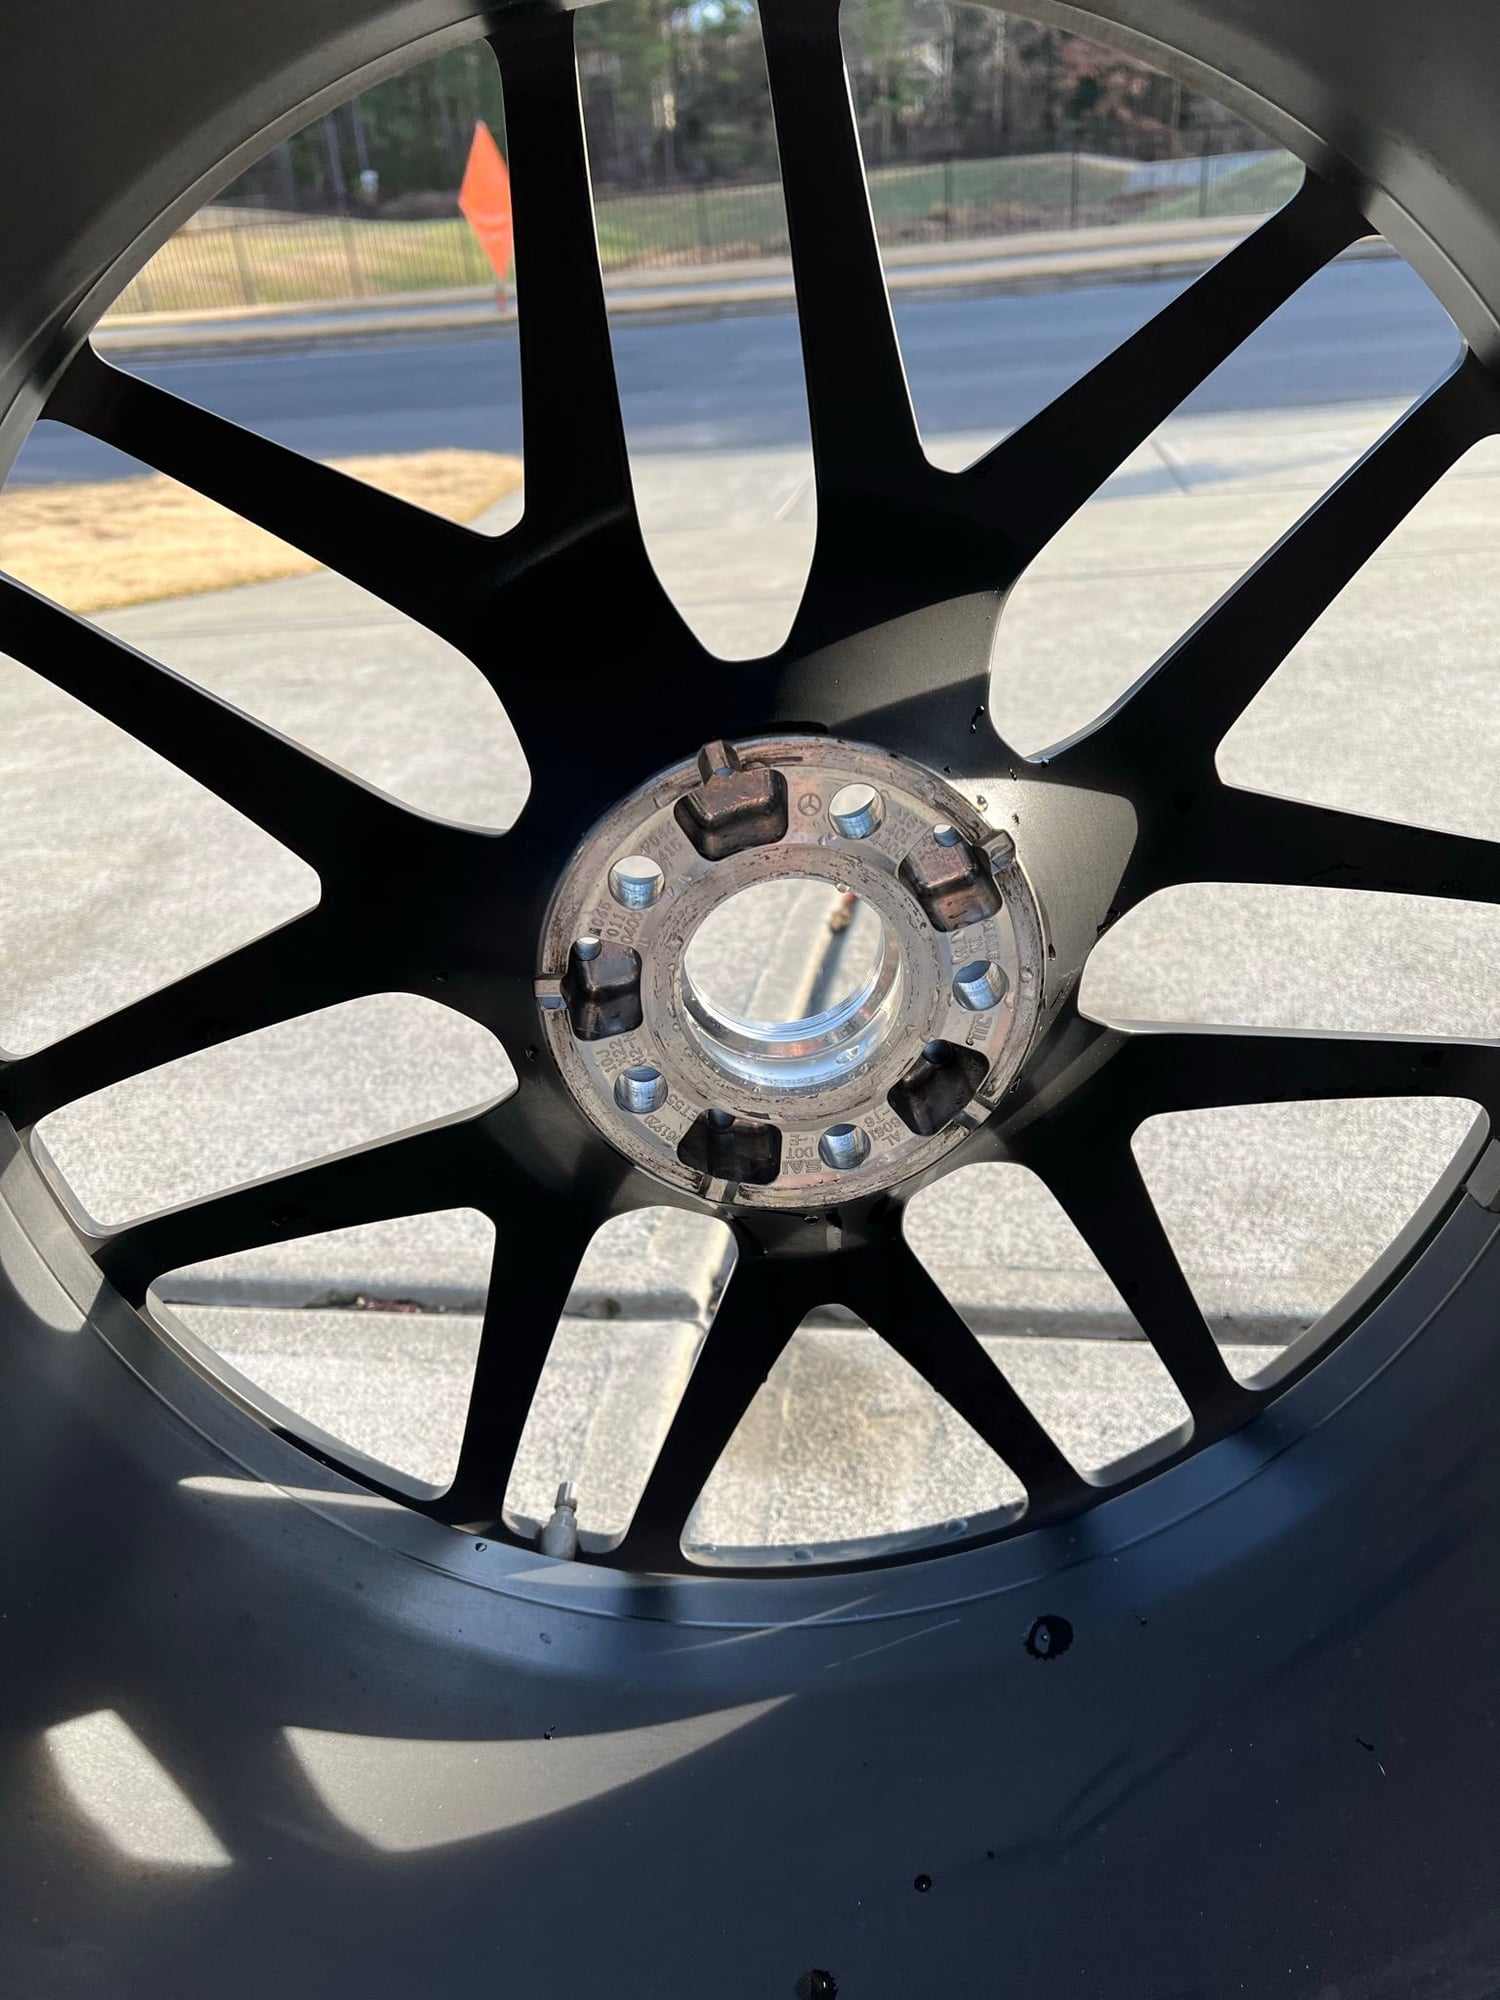 Wheels and Tires/Axles - SET OF 4 22" OEM AMG CROSS SPOKE FORGED WHEELS MERCEDES BENZ GLE 53 GLE 63 AMG - New - 2019 to 2022 Mercedes-Benz GLE-Class - 2019 to 2022 Mercedes-Benz GLE63 AMG - 2019 to 2022 Mercedes-Benz GLE63 AMG S - Durham, NC 27713, United States